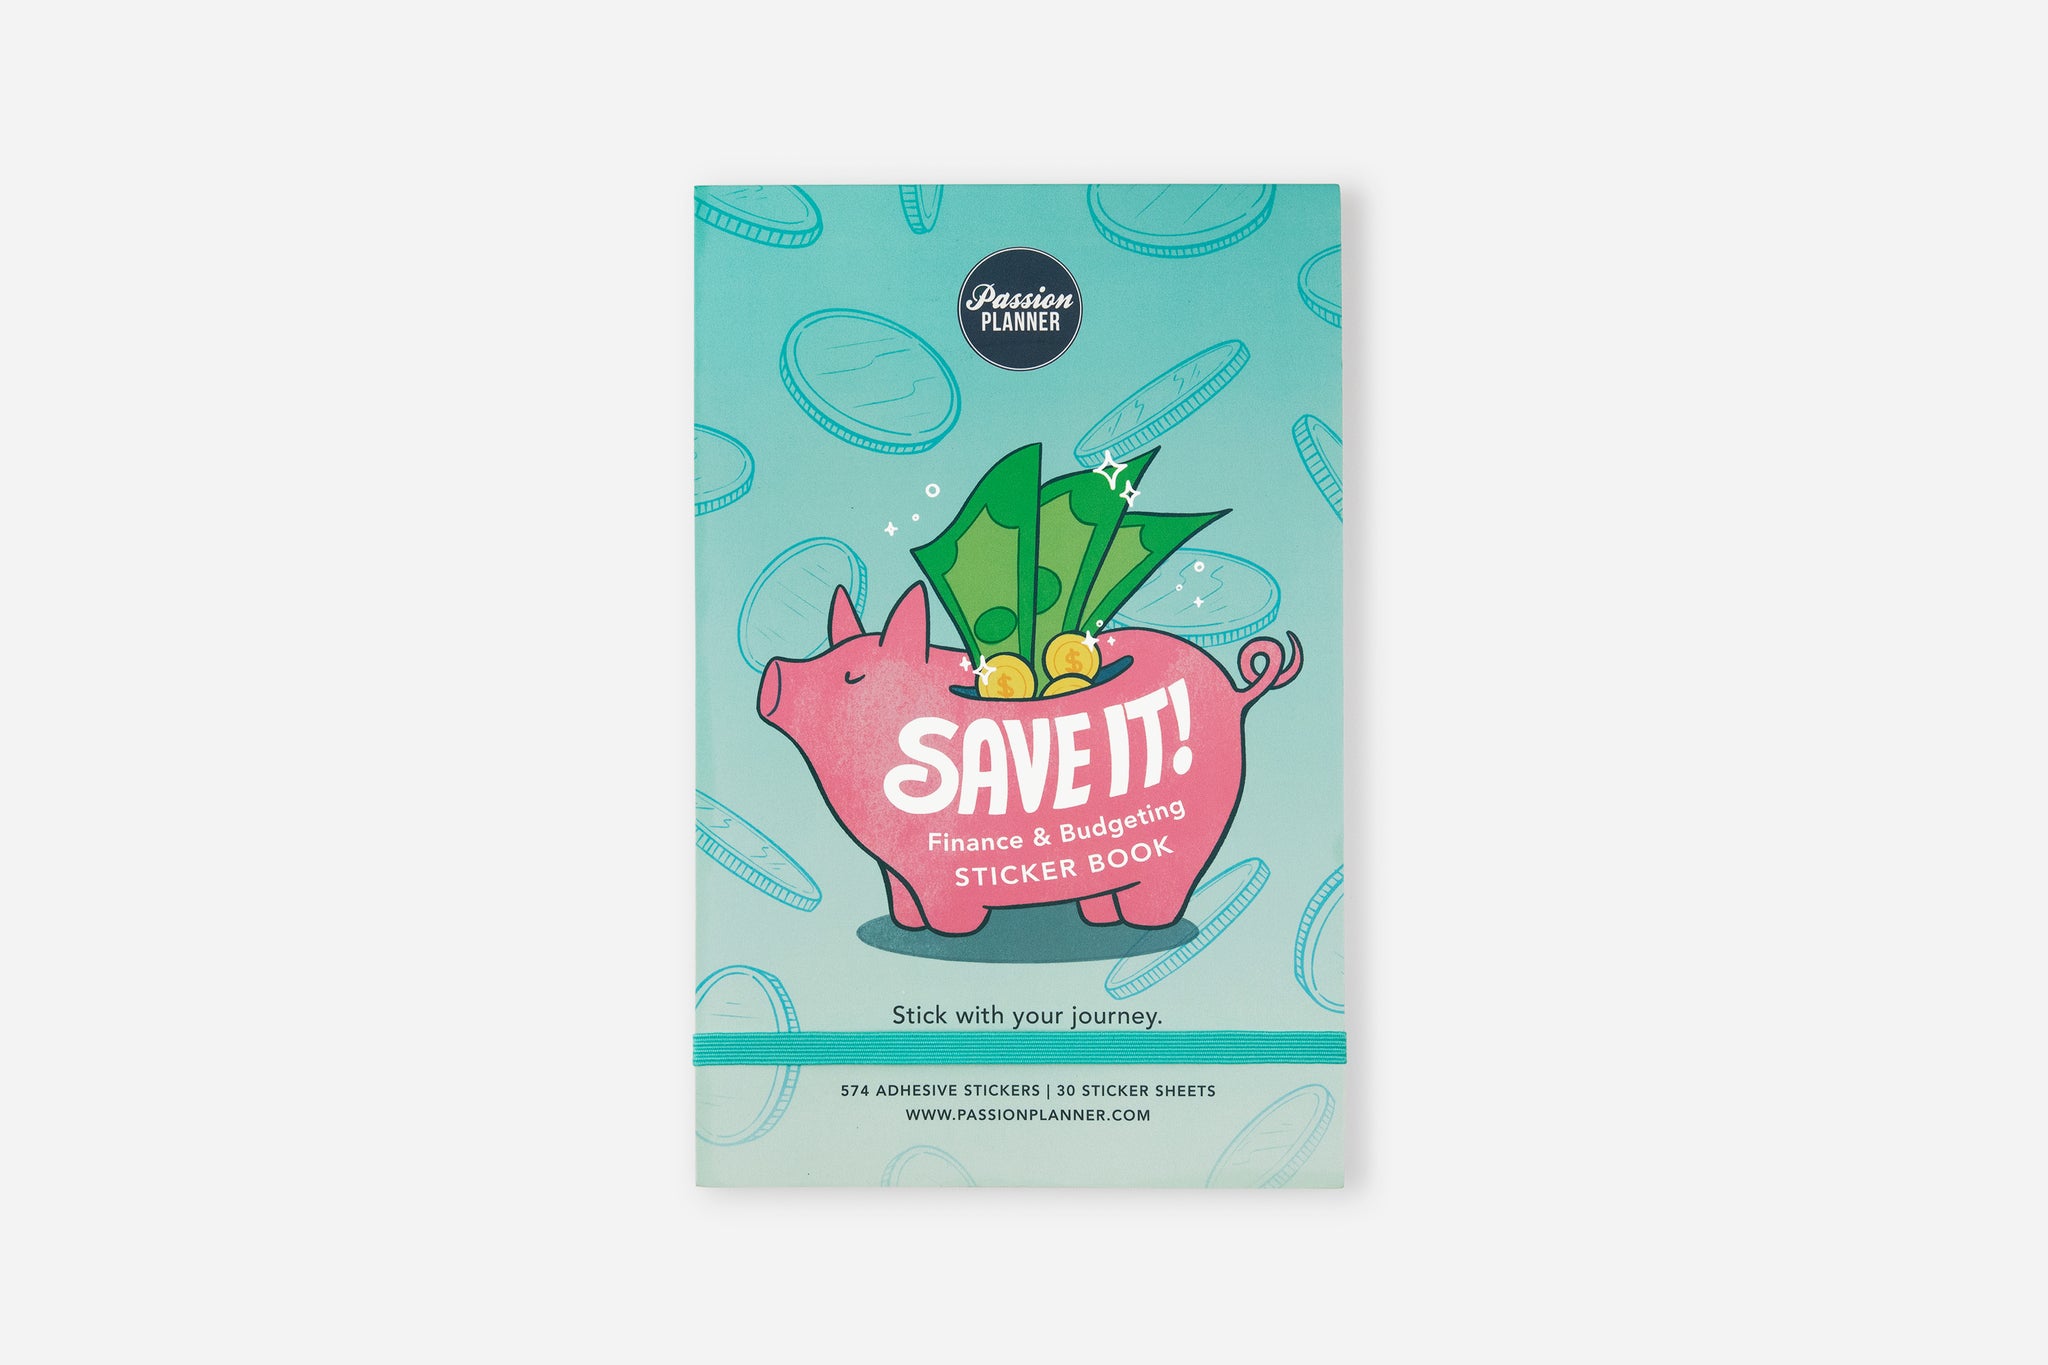 Save It! Finance and Budget Sticker Book by Passion Planner